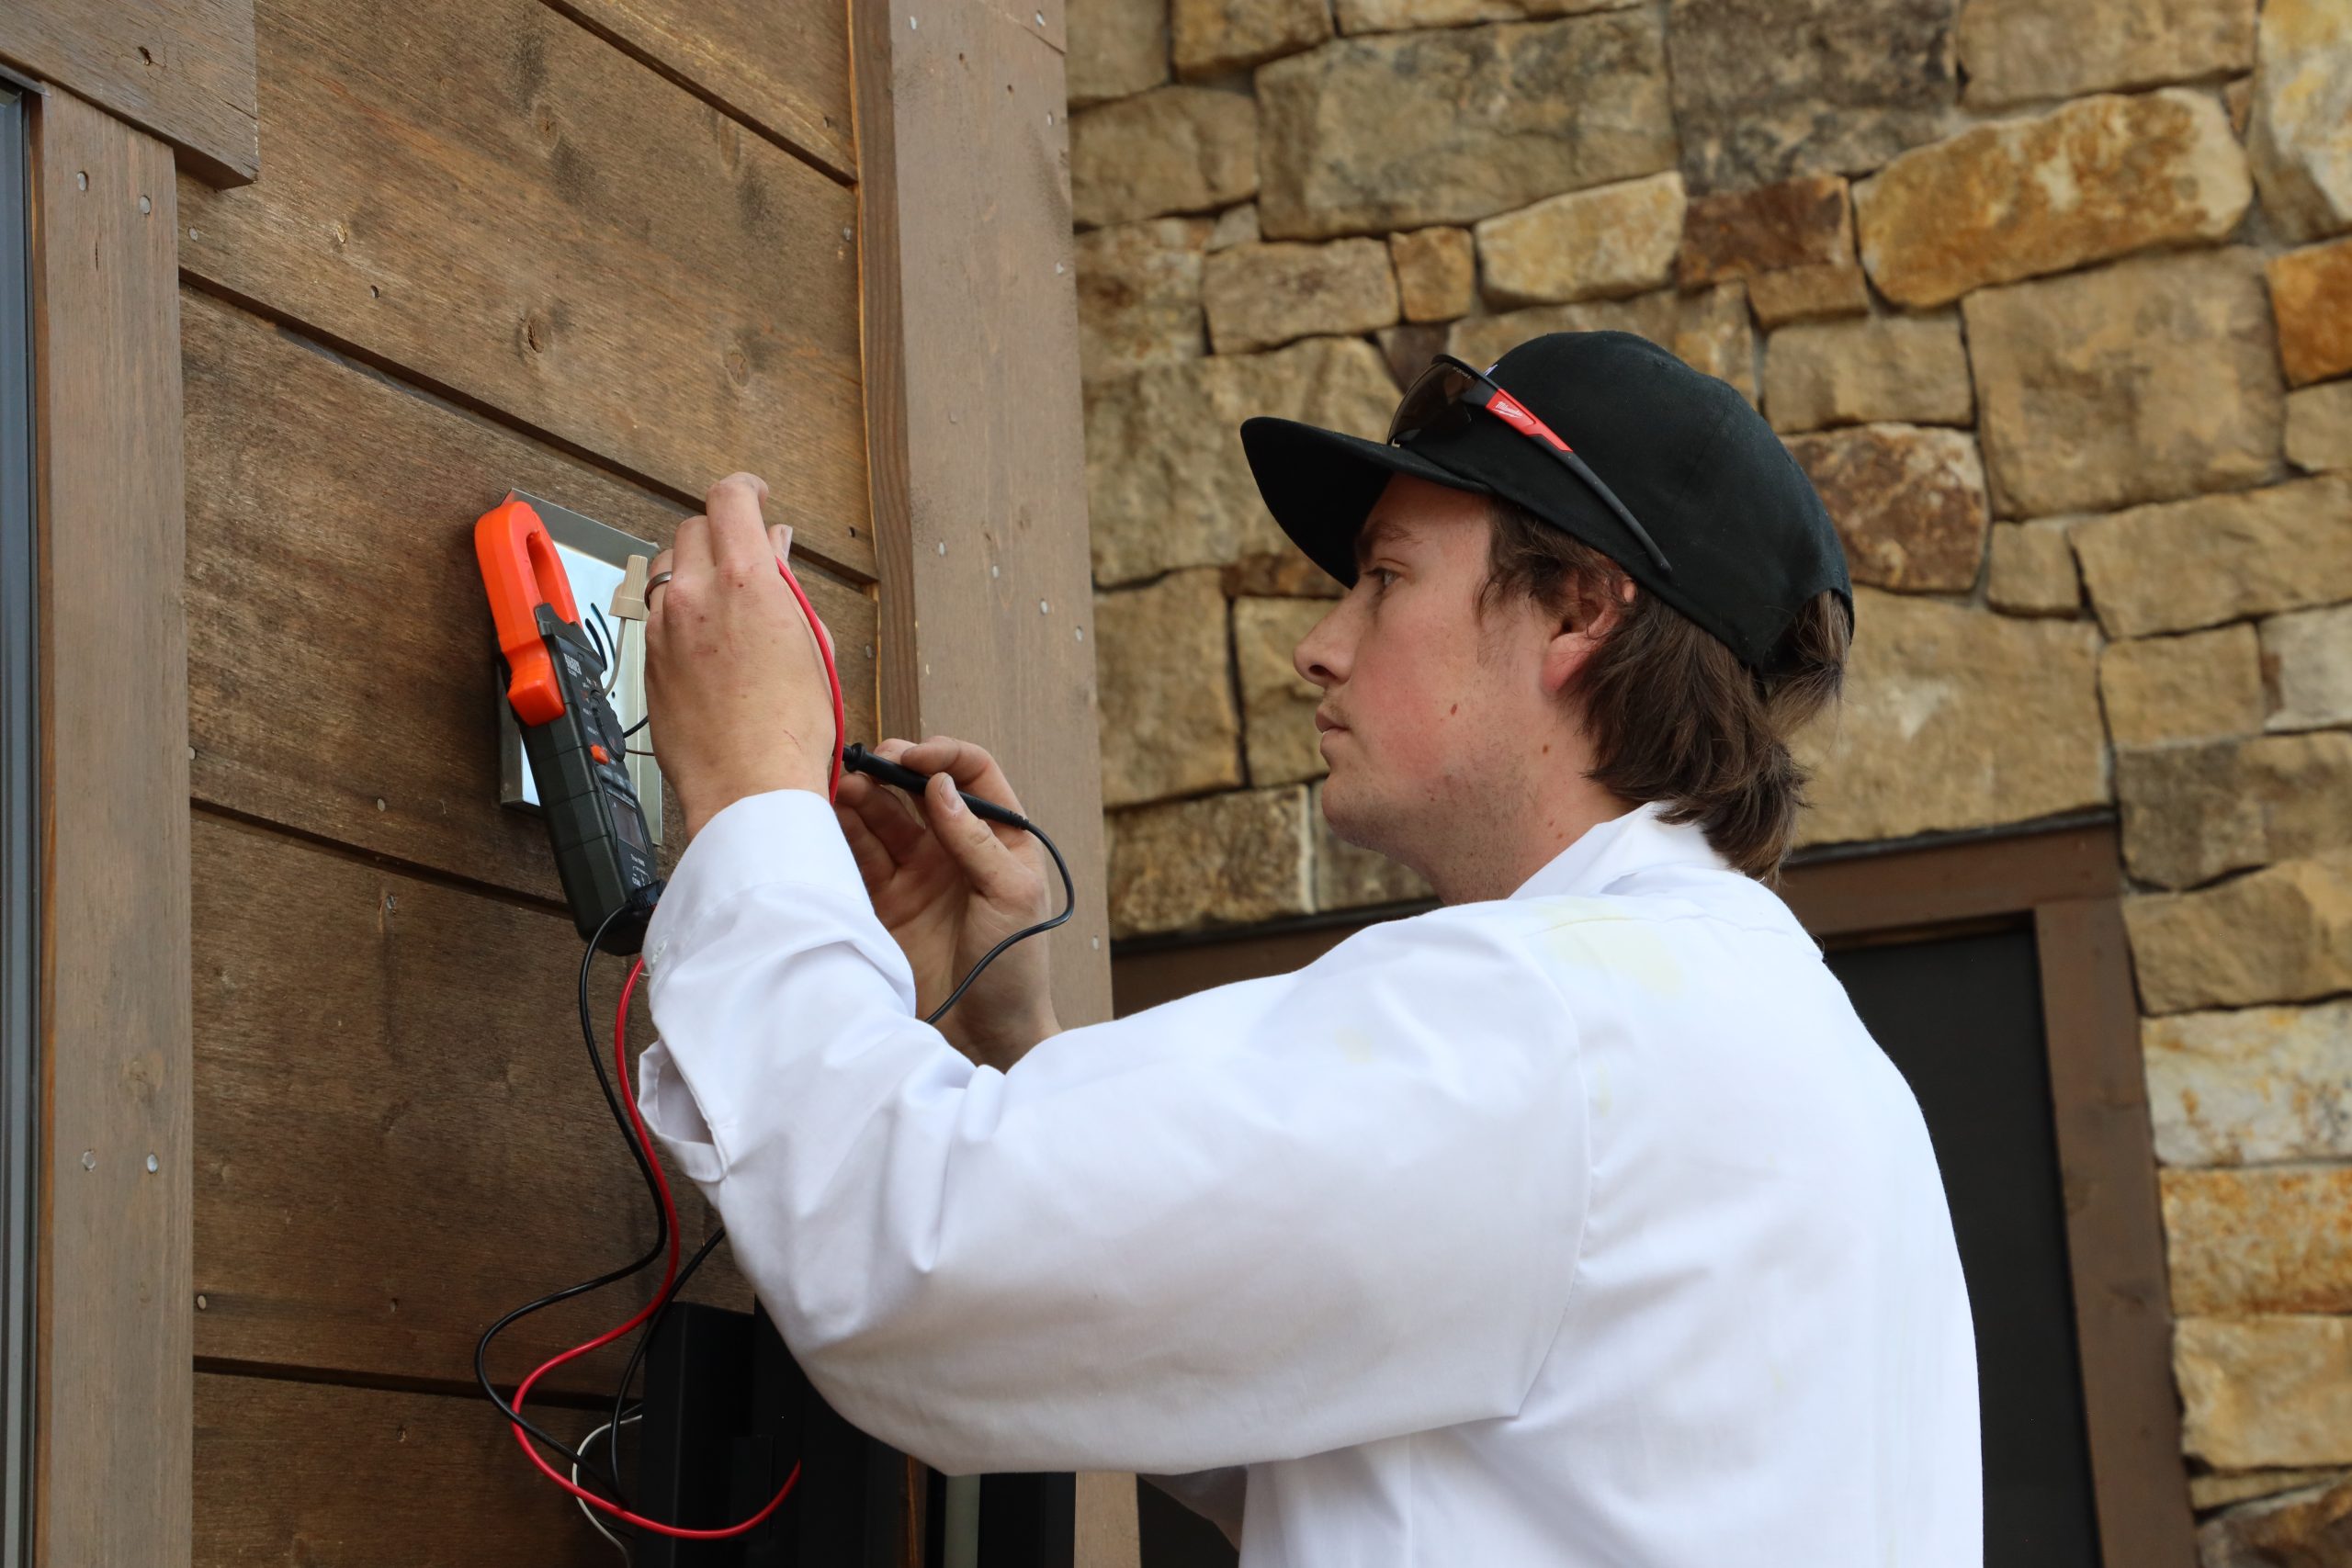 Electrical Safety Inspection in Golden, CO from Fix-it 24/7 Heating, Air, Electric & Plumbing